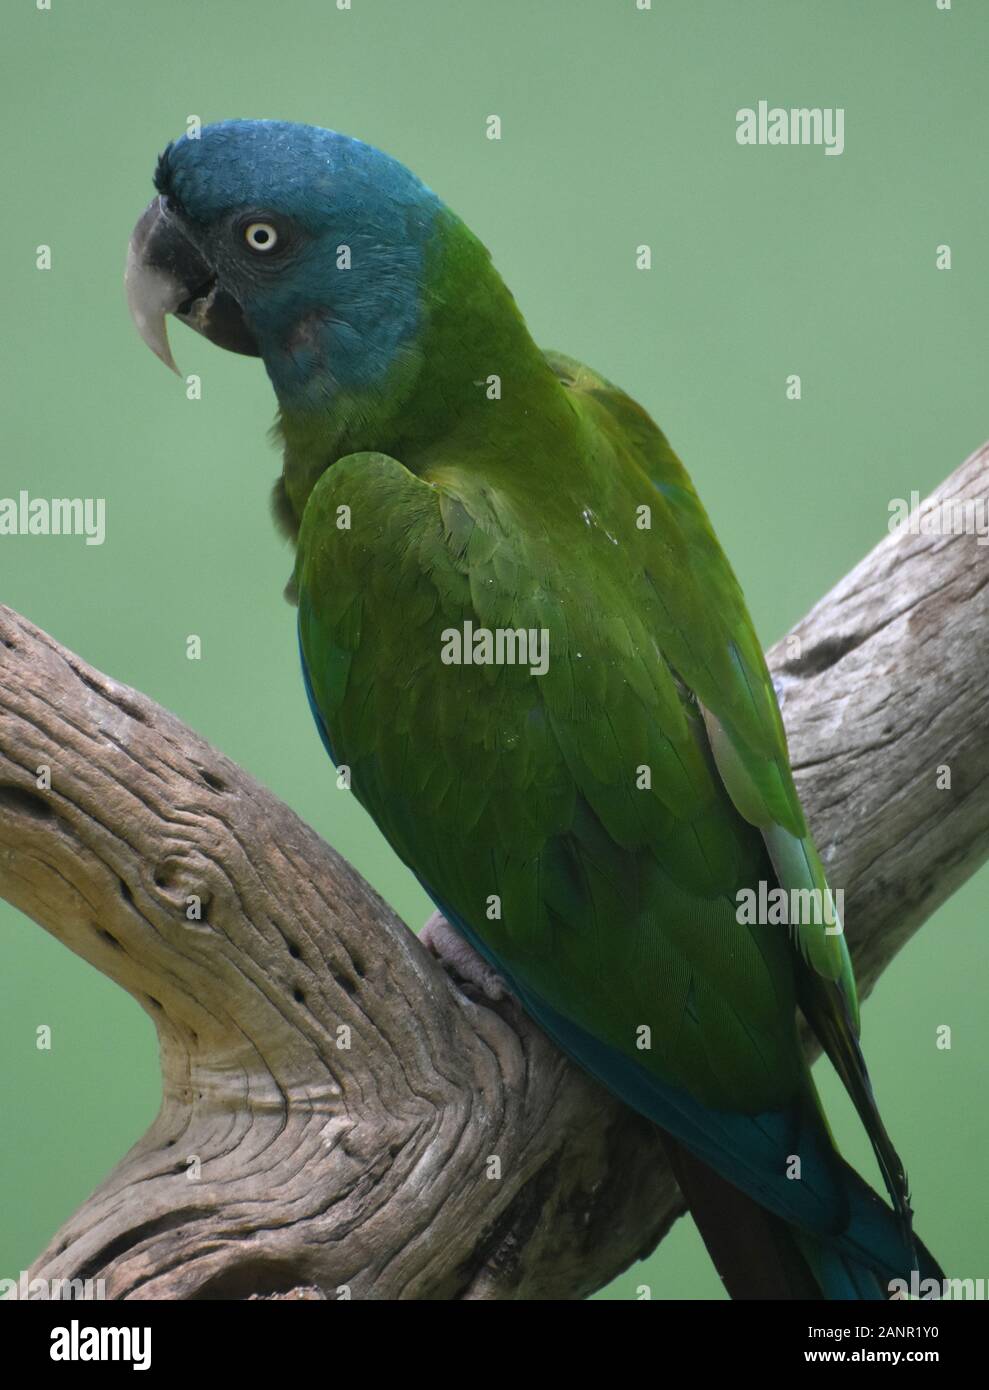 Gorgeous bright green and blue Cuban Amazon parrot on a tree perch Stock  Photo - Alamy